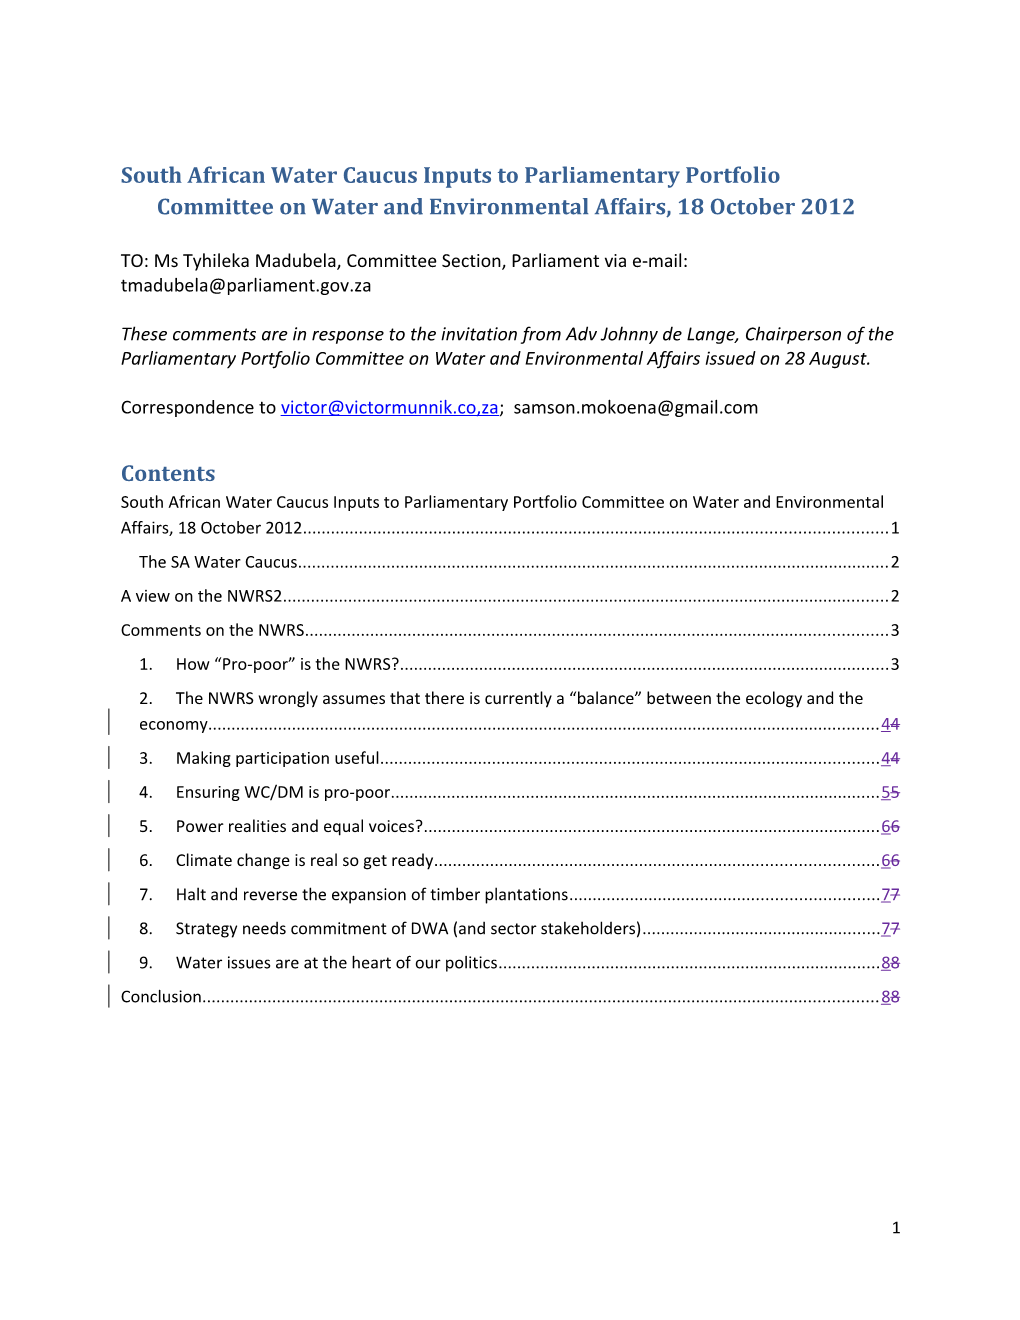 South African Water Caucus Inputs to Parliamentary Portfolio Committee on Water And